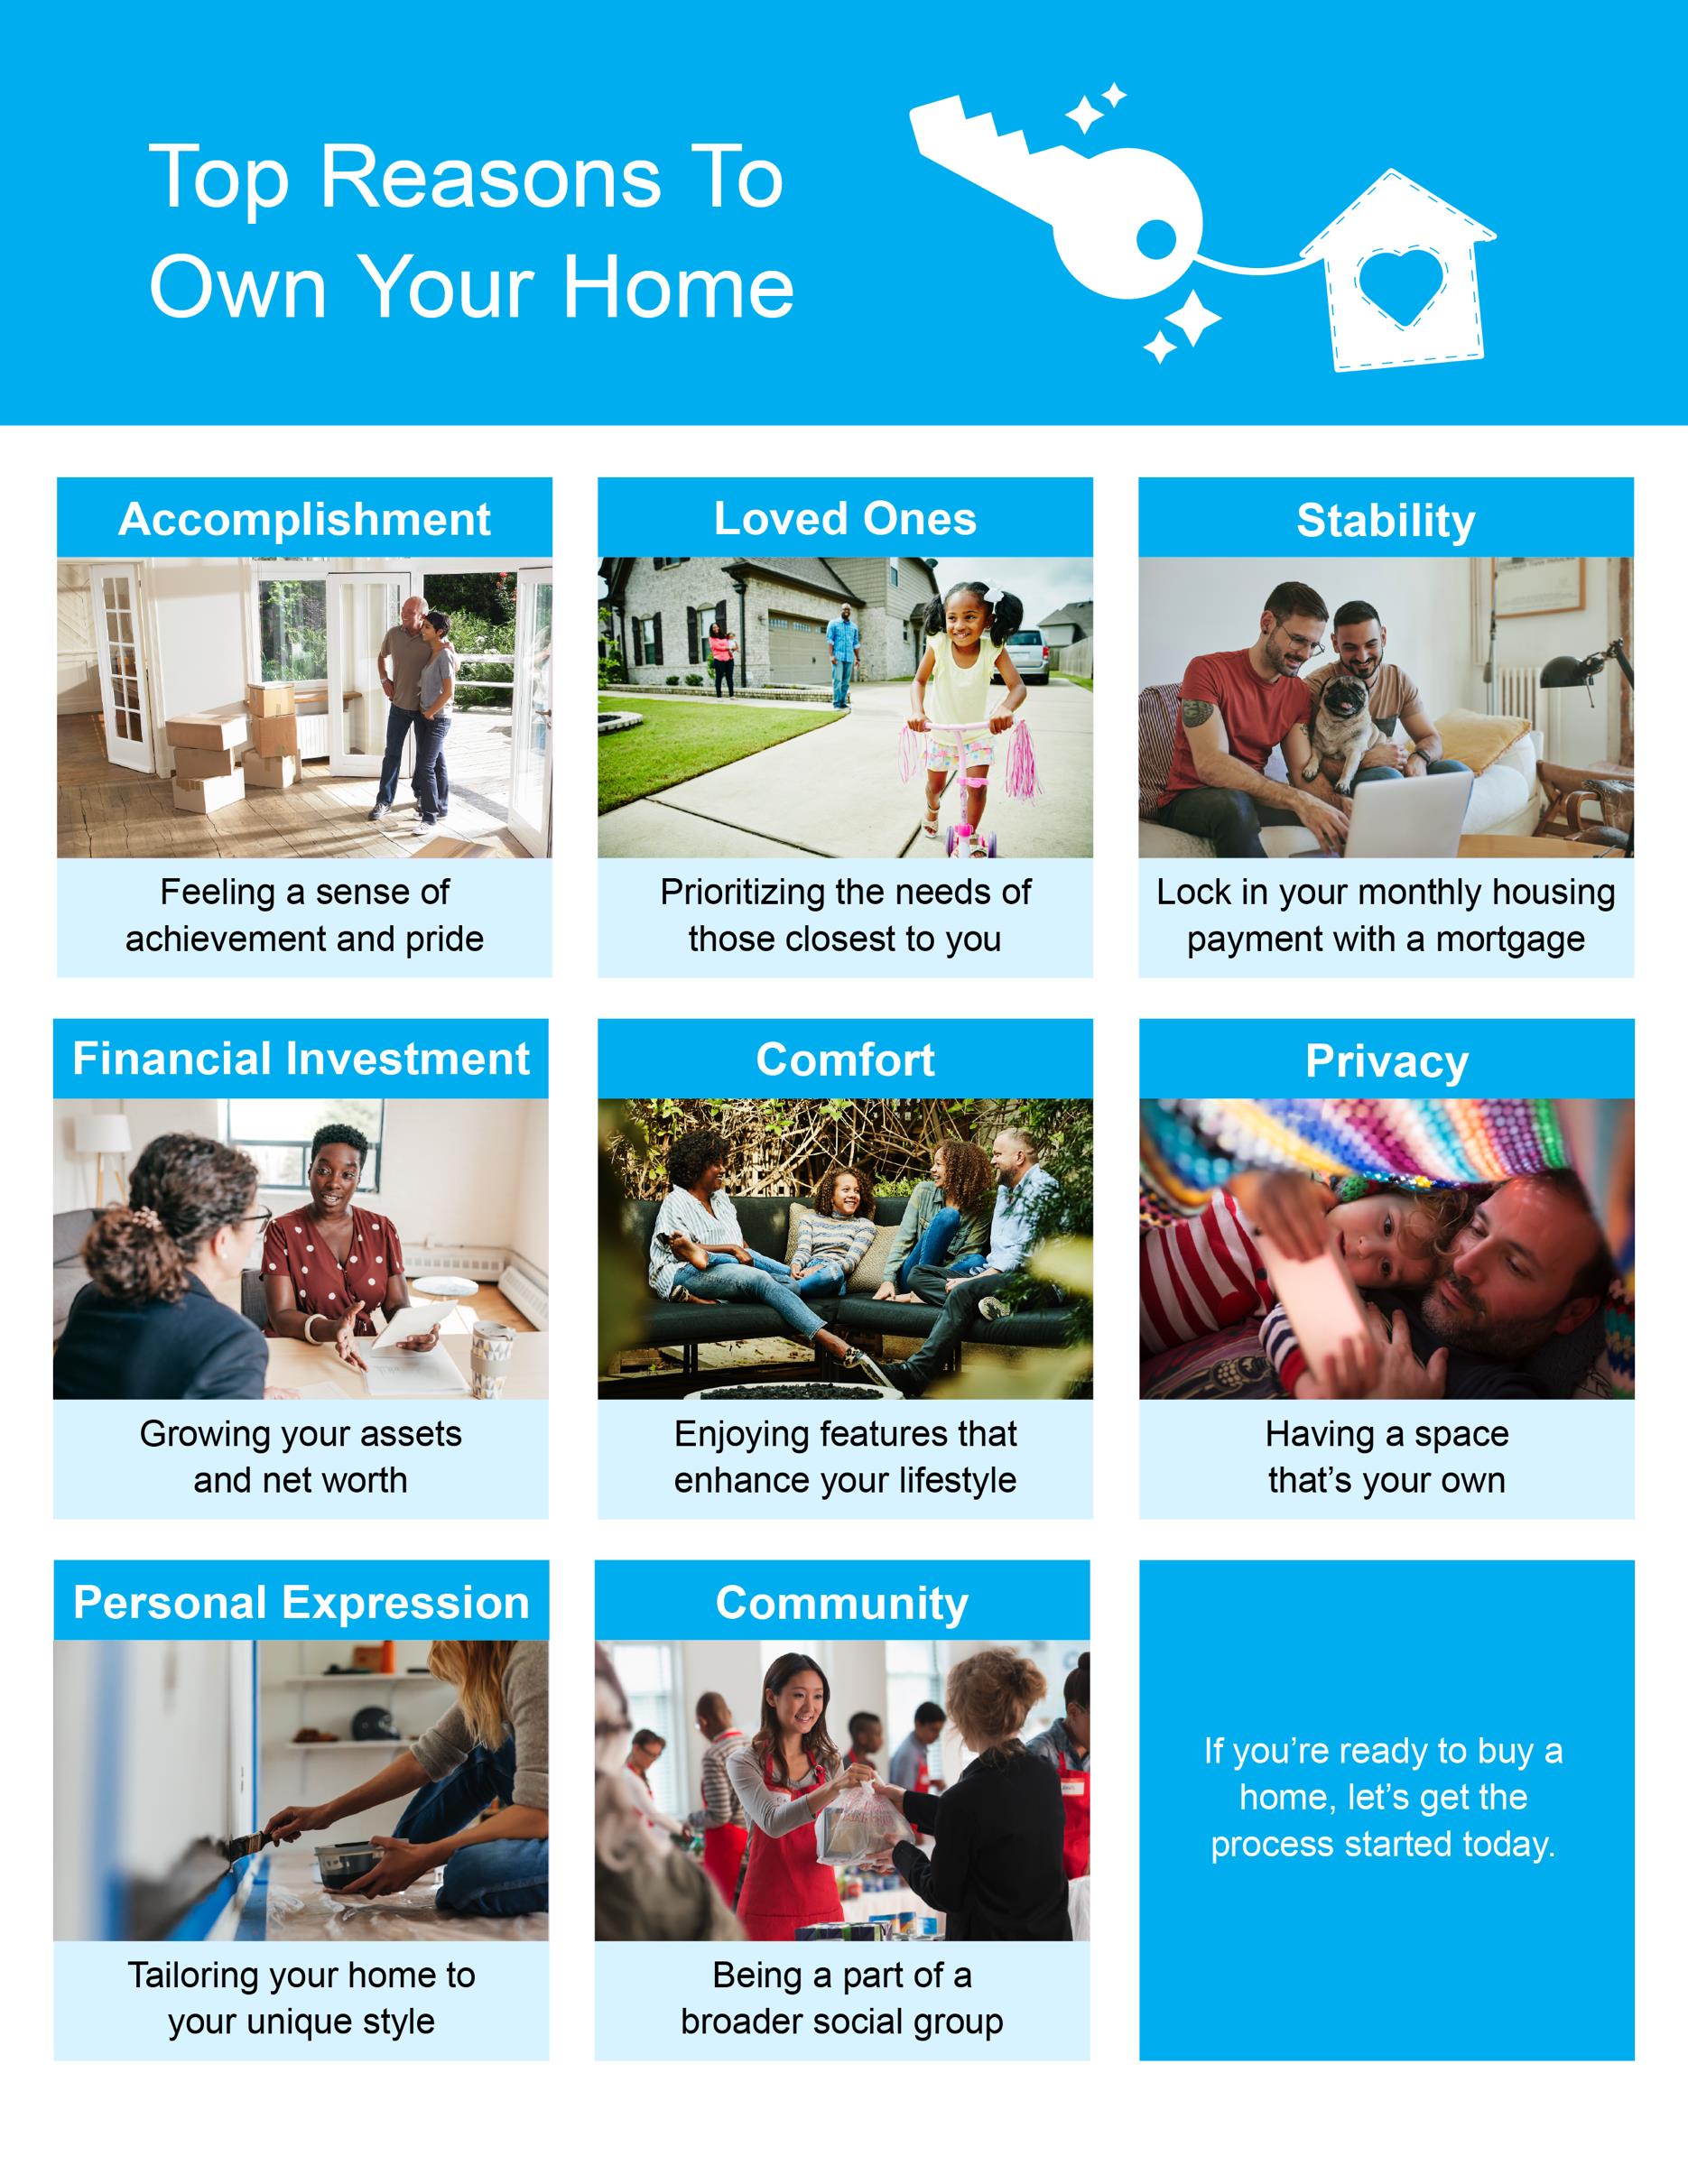 Top reasons to own your home